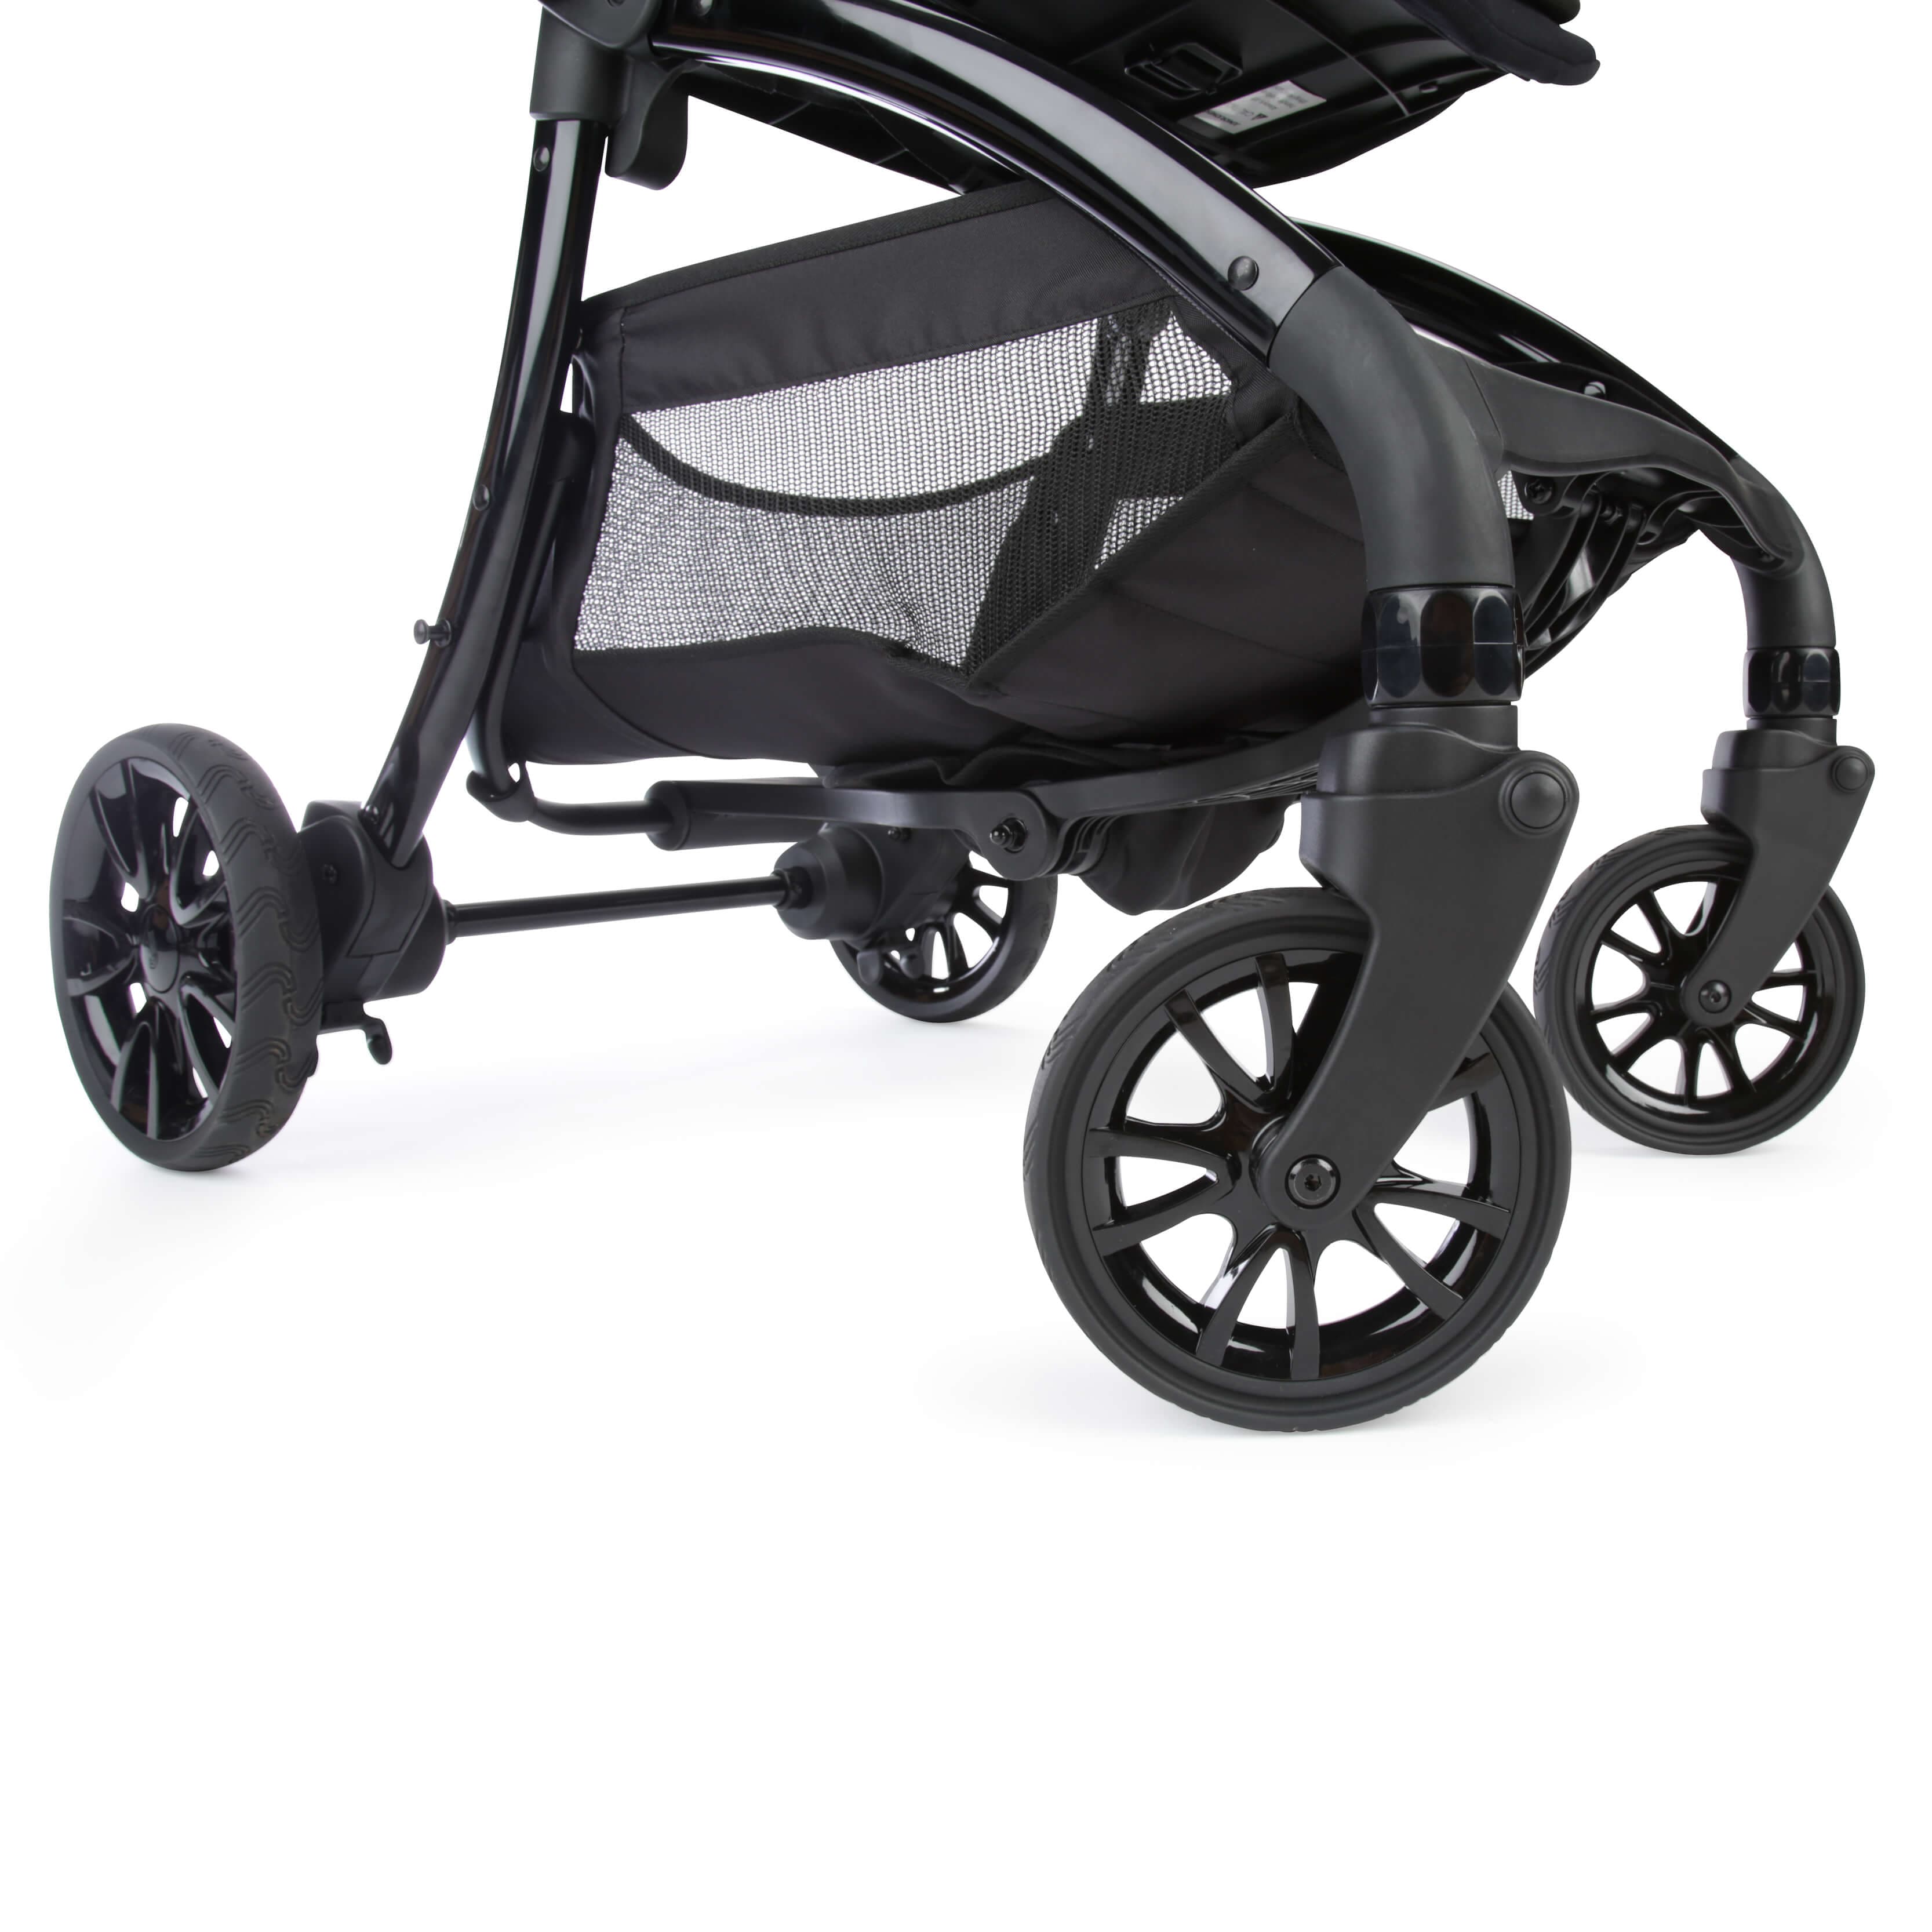 Junior Jones Aylo Rich Black 6pc Travel System inc Doona Blush Pink Car Seat - For Your Little One